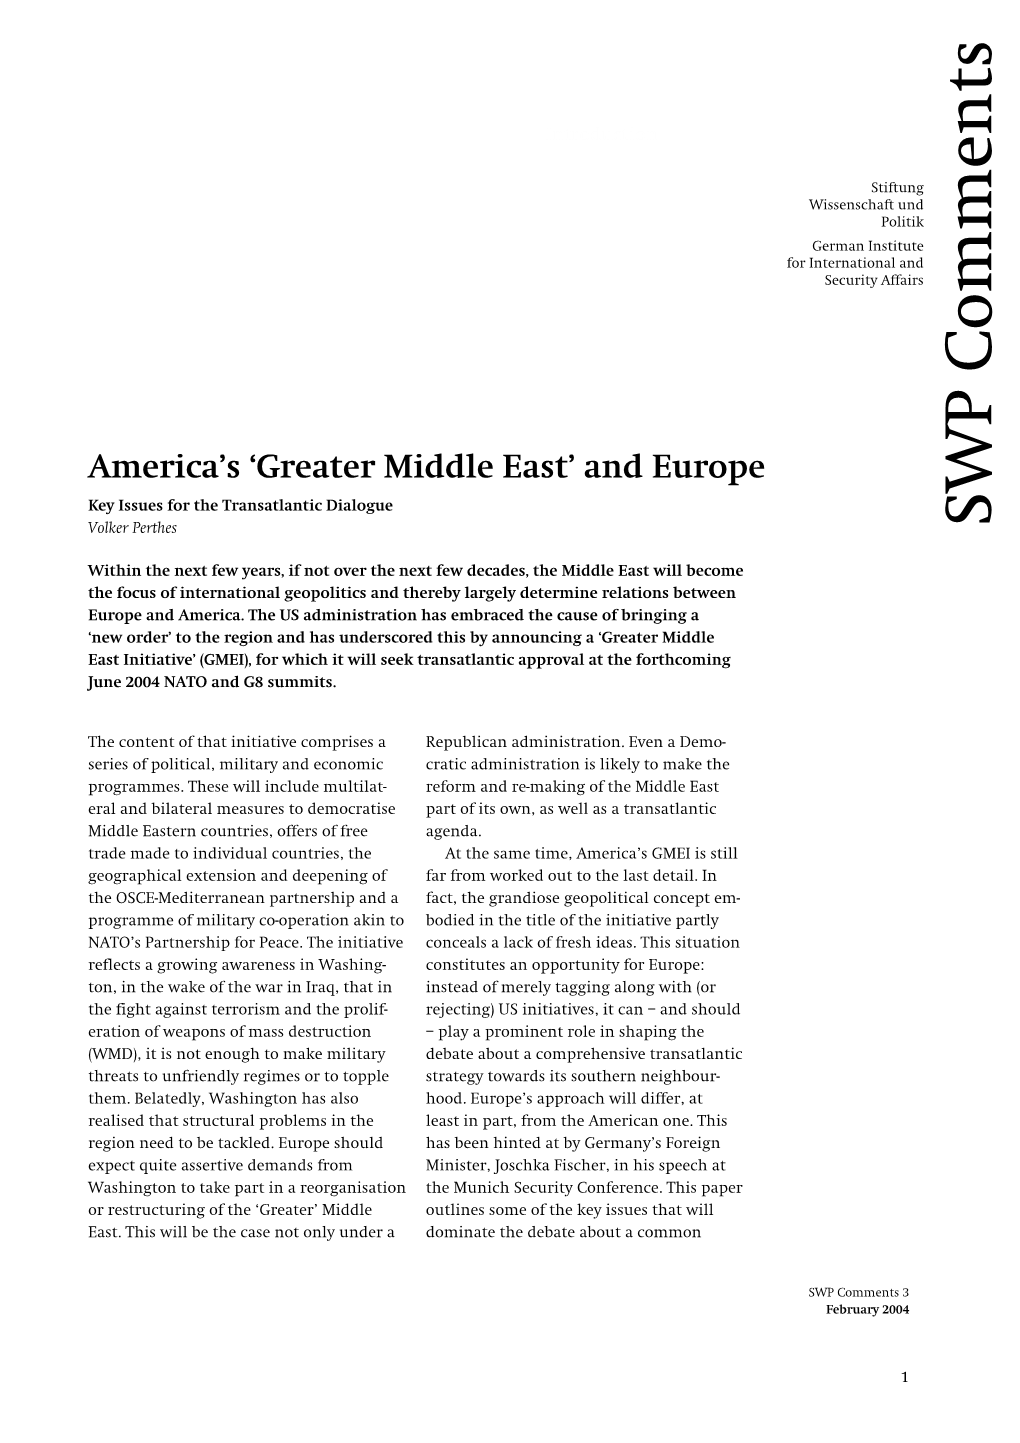 America's 'Greater Middle East' and Europe